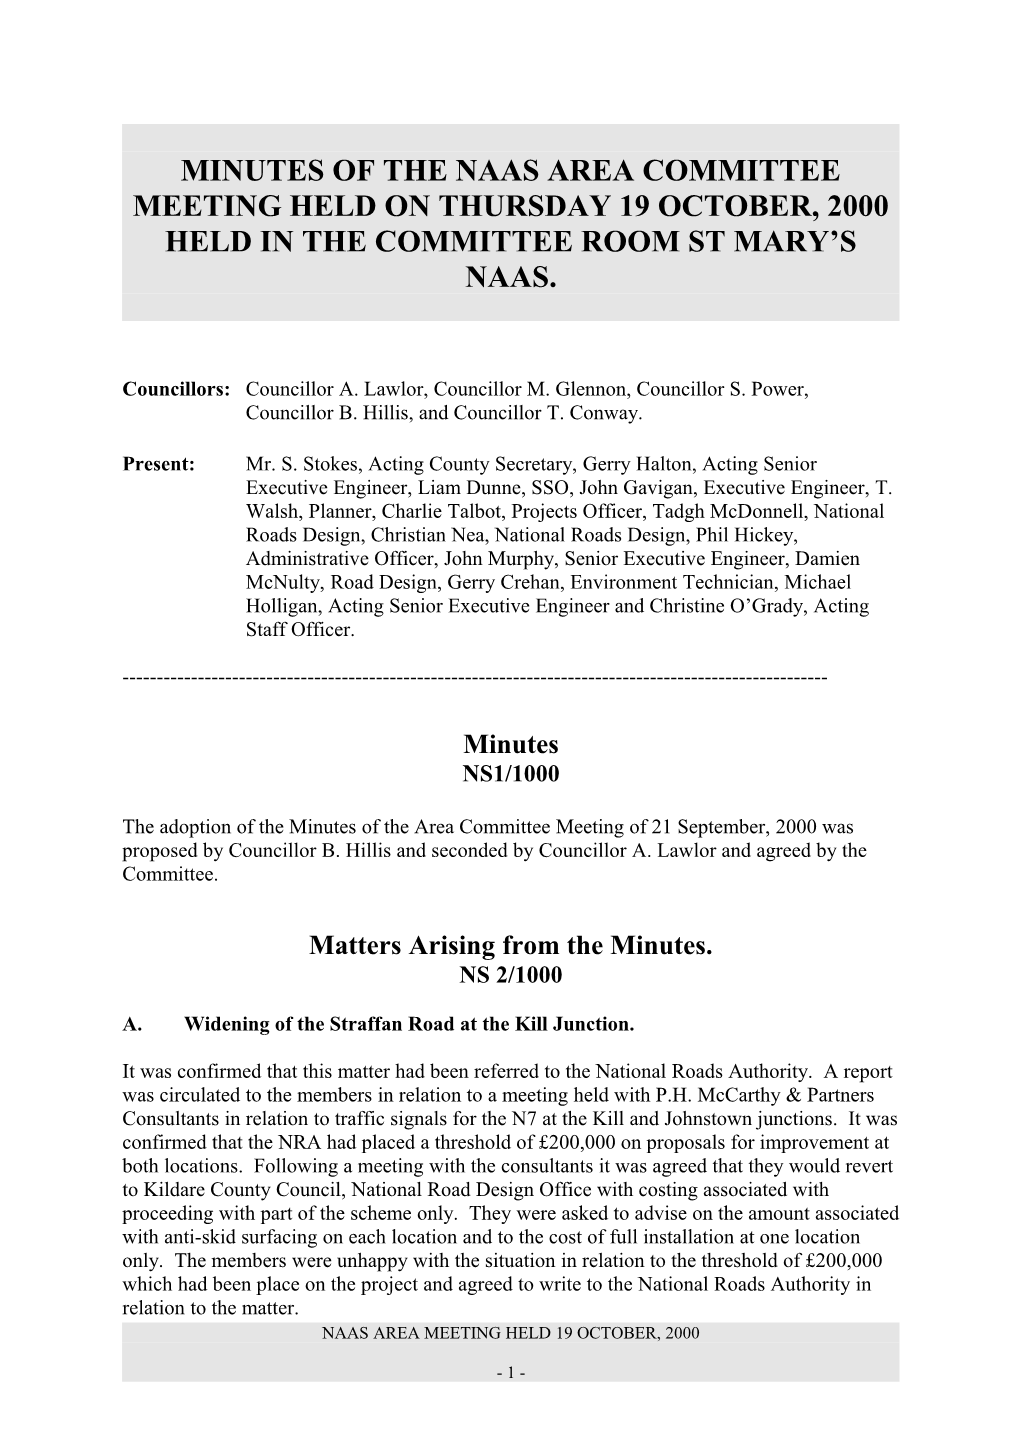 Minutes of the Naas Area Committee Meeting Held on Thursday 19 October, 2000 Held in The